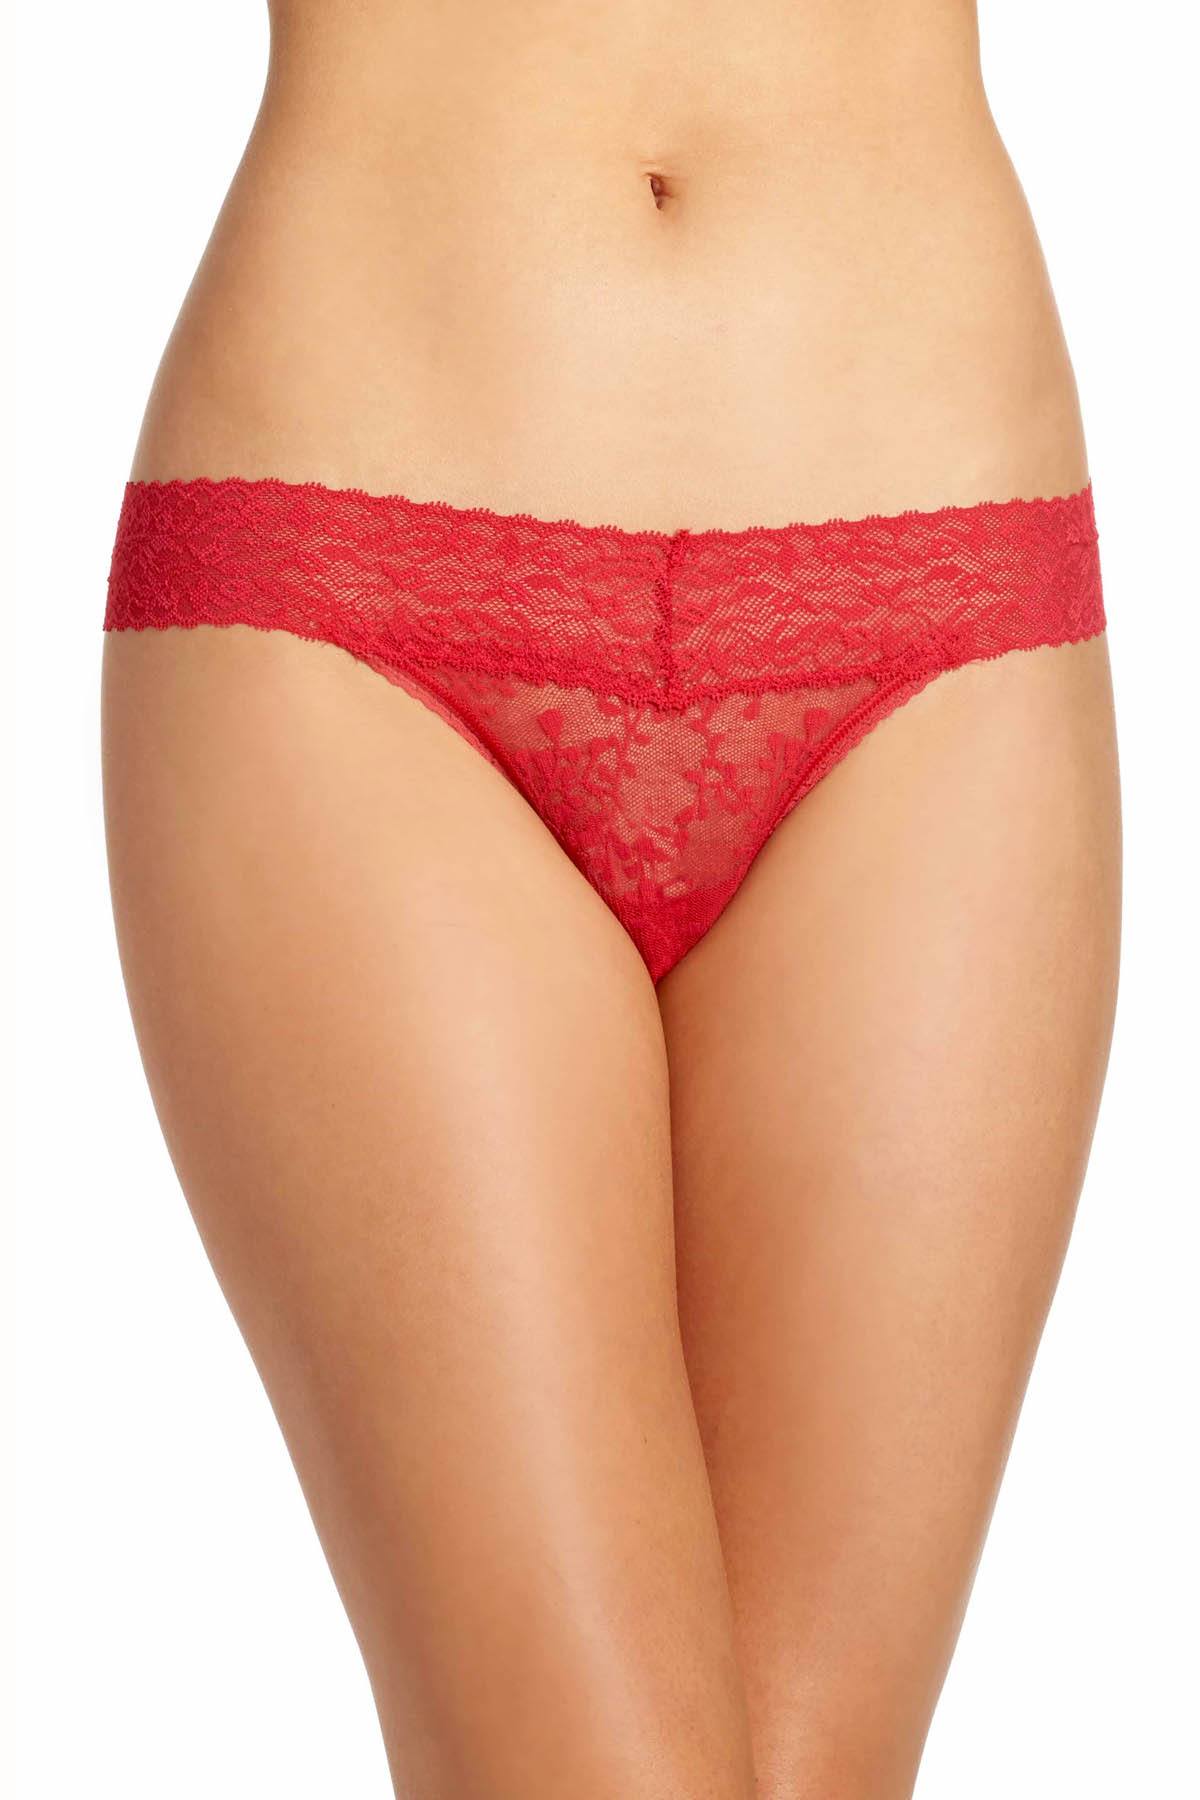 Calvin Klein Empower-Red Bare Lace Thong